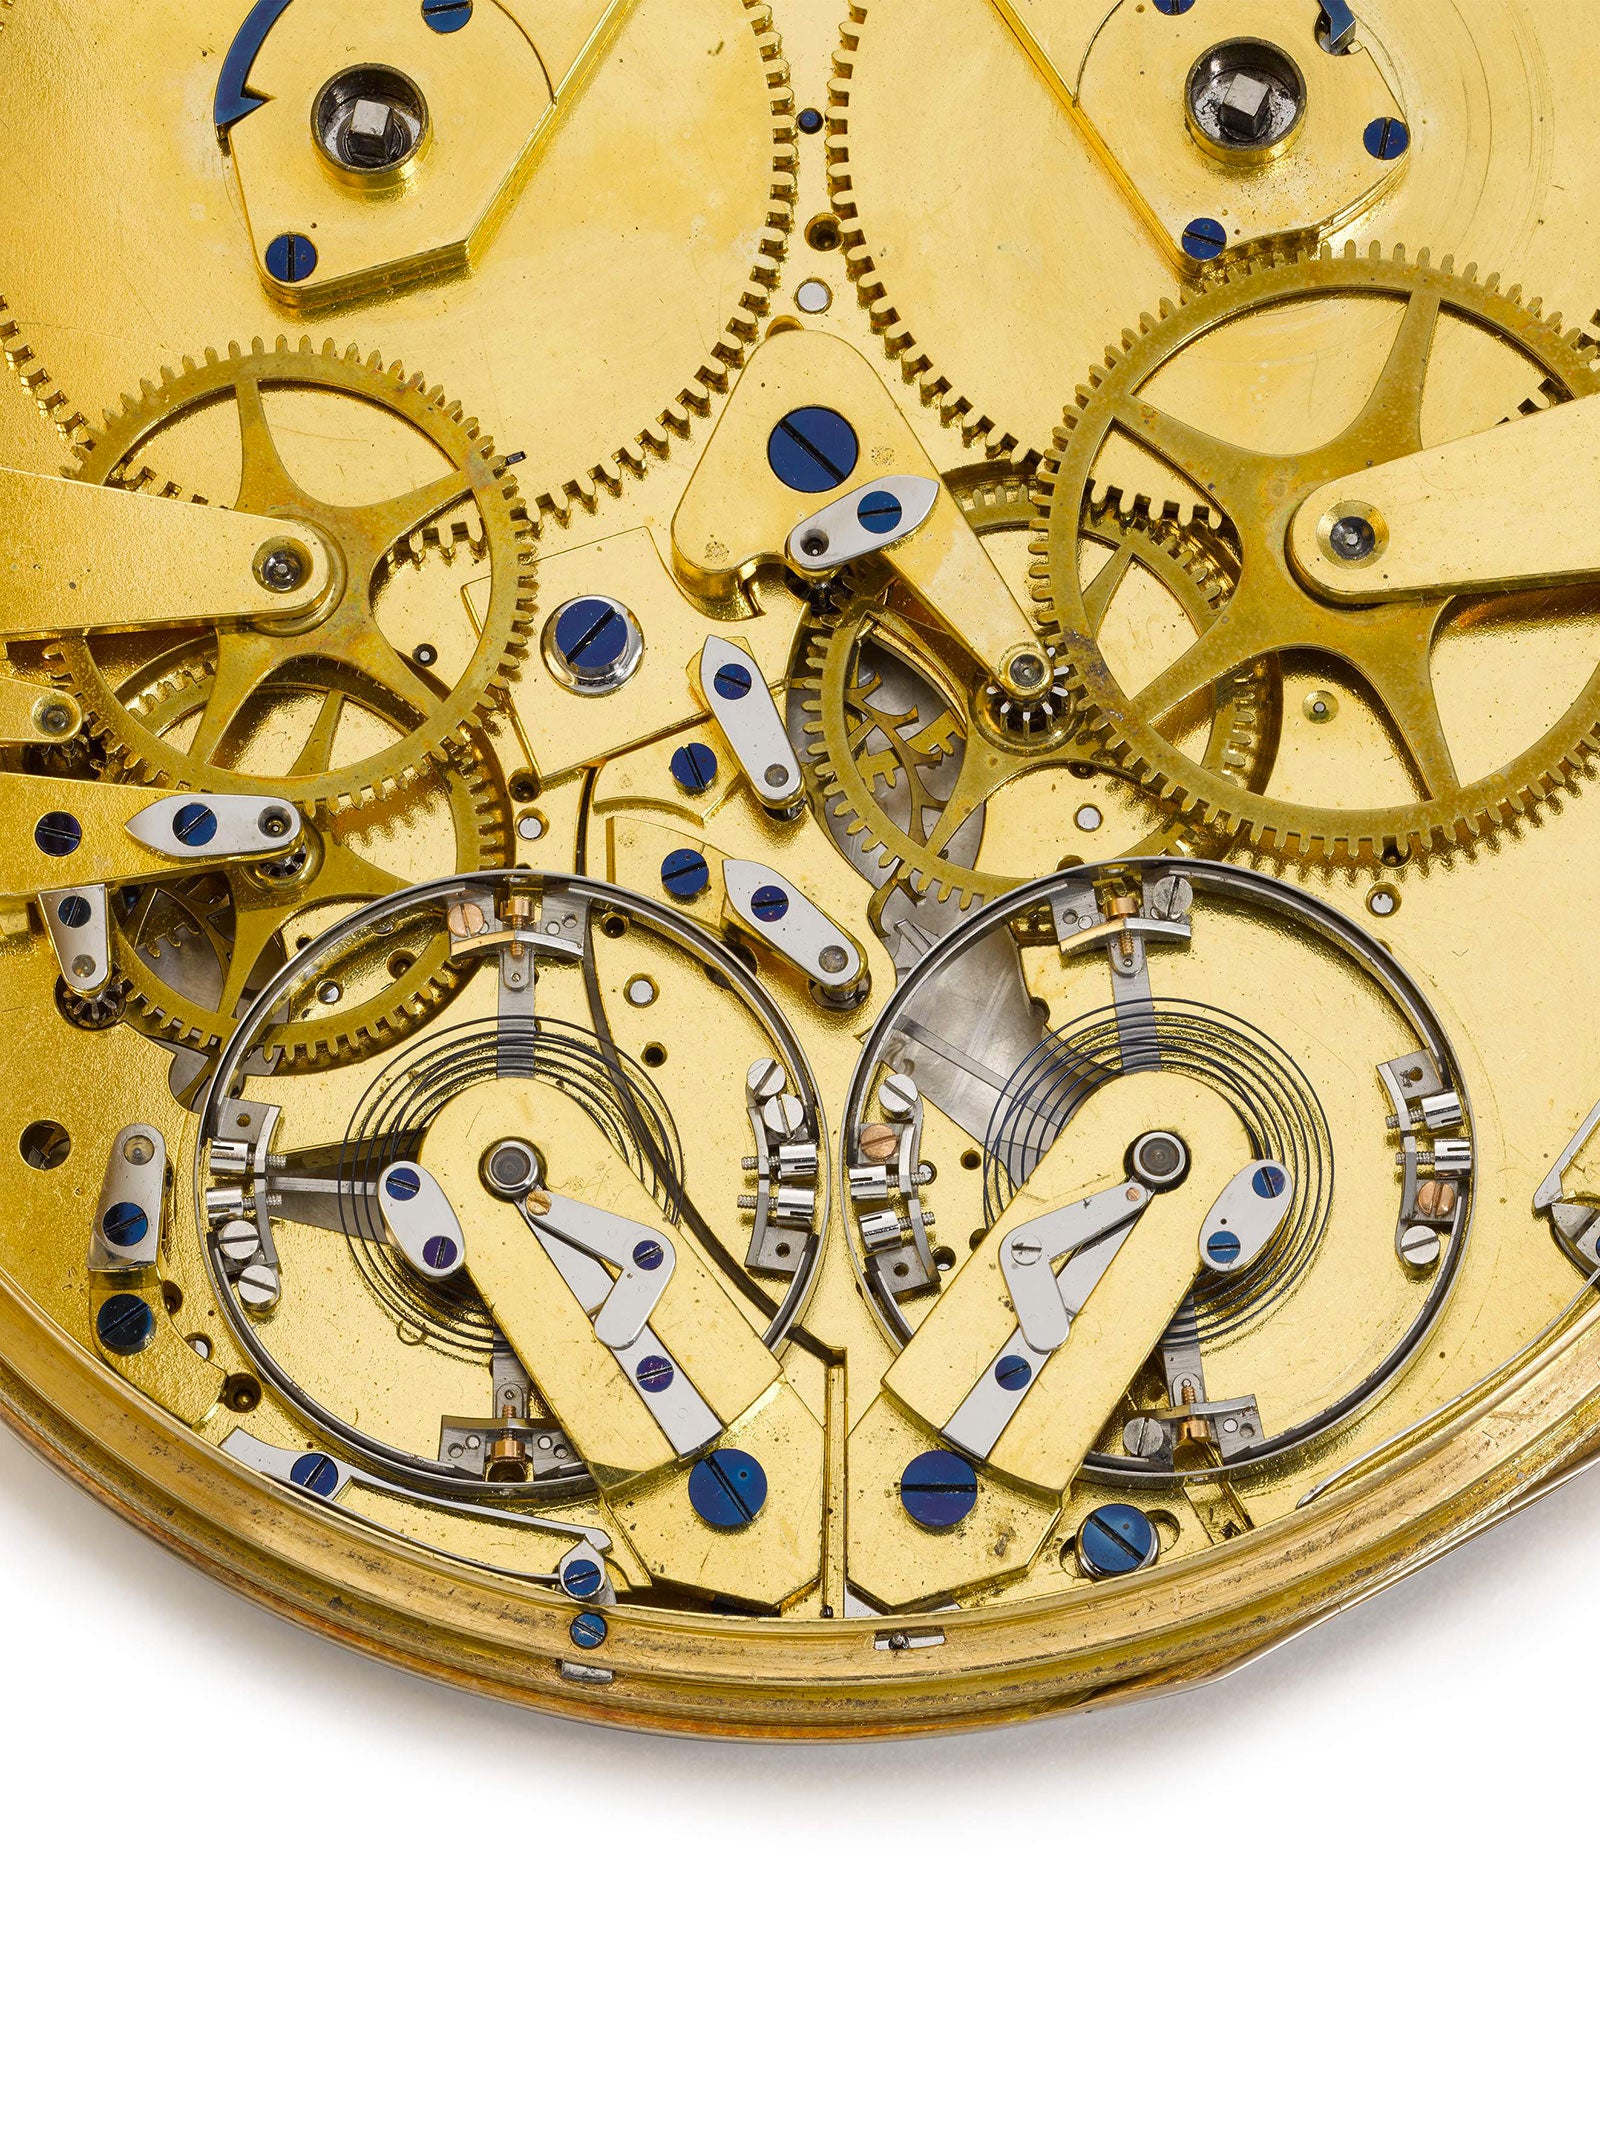 Breguet Resonance pocket watch back in Chasing Accuracy in Mechanical Wristwatches for A Collected Man London